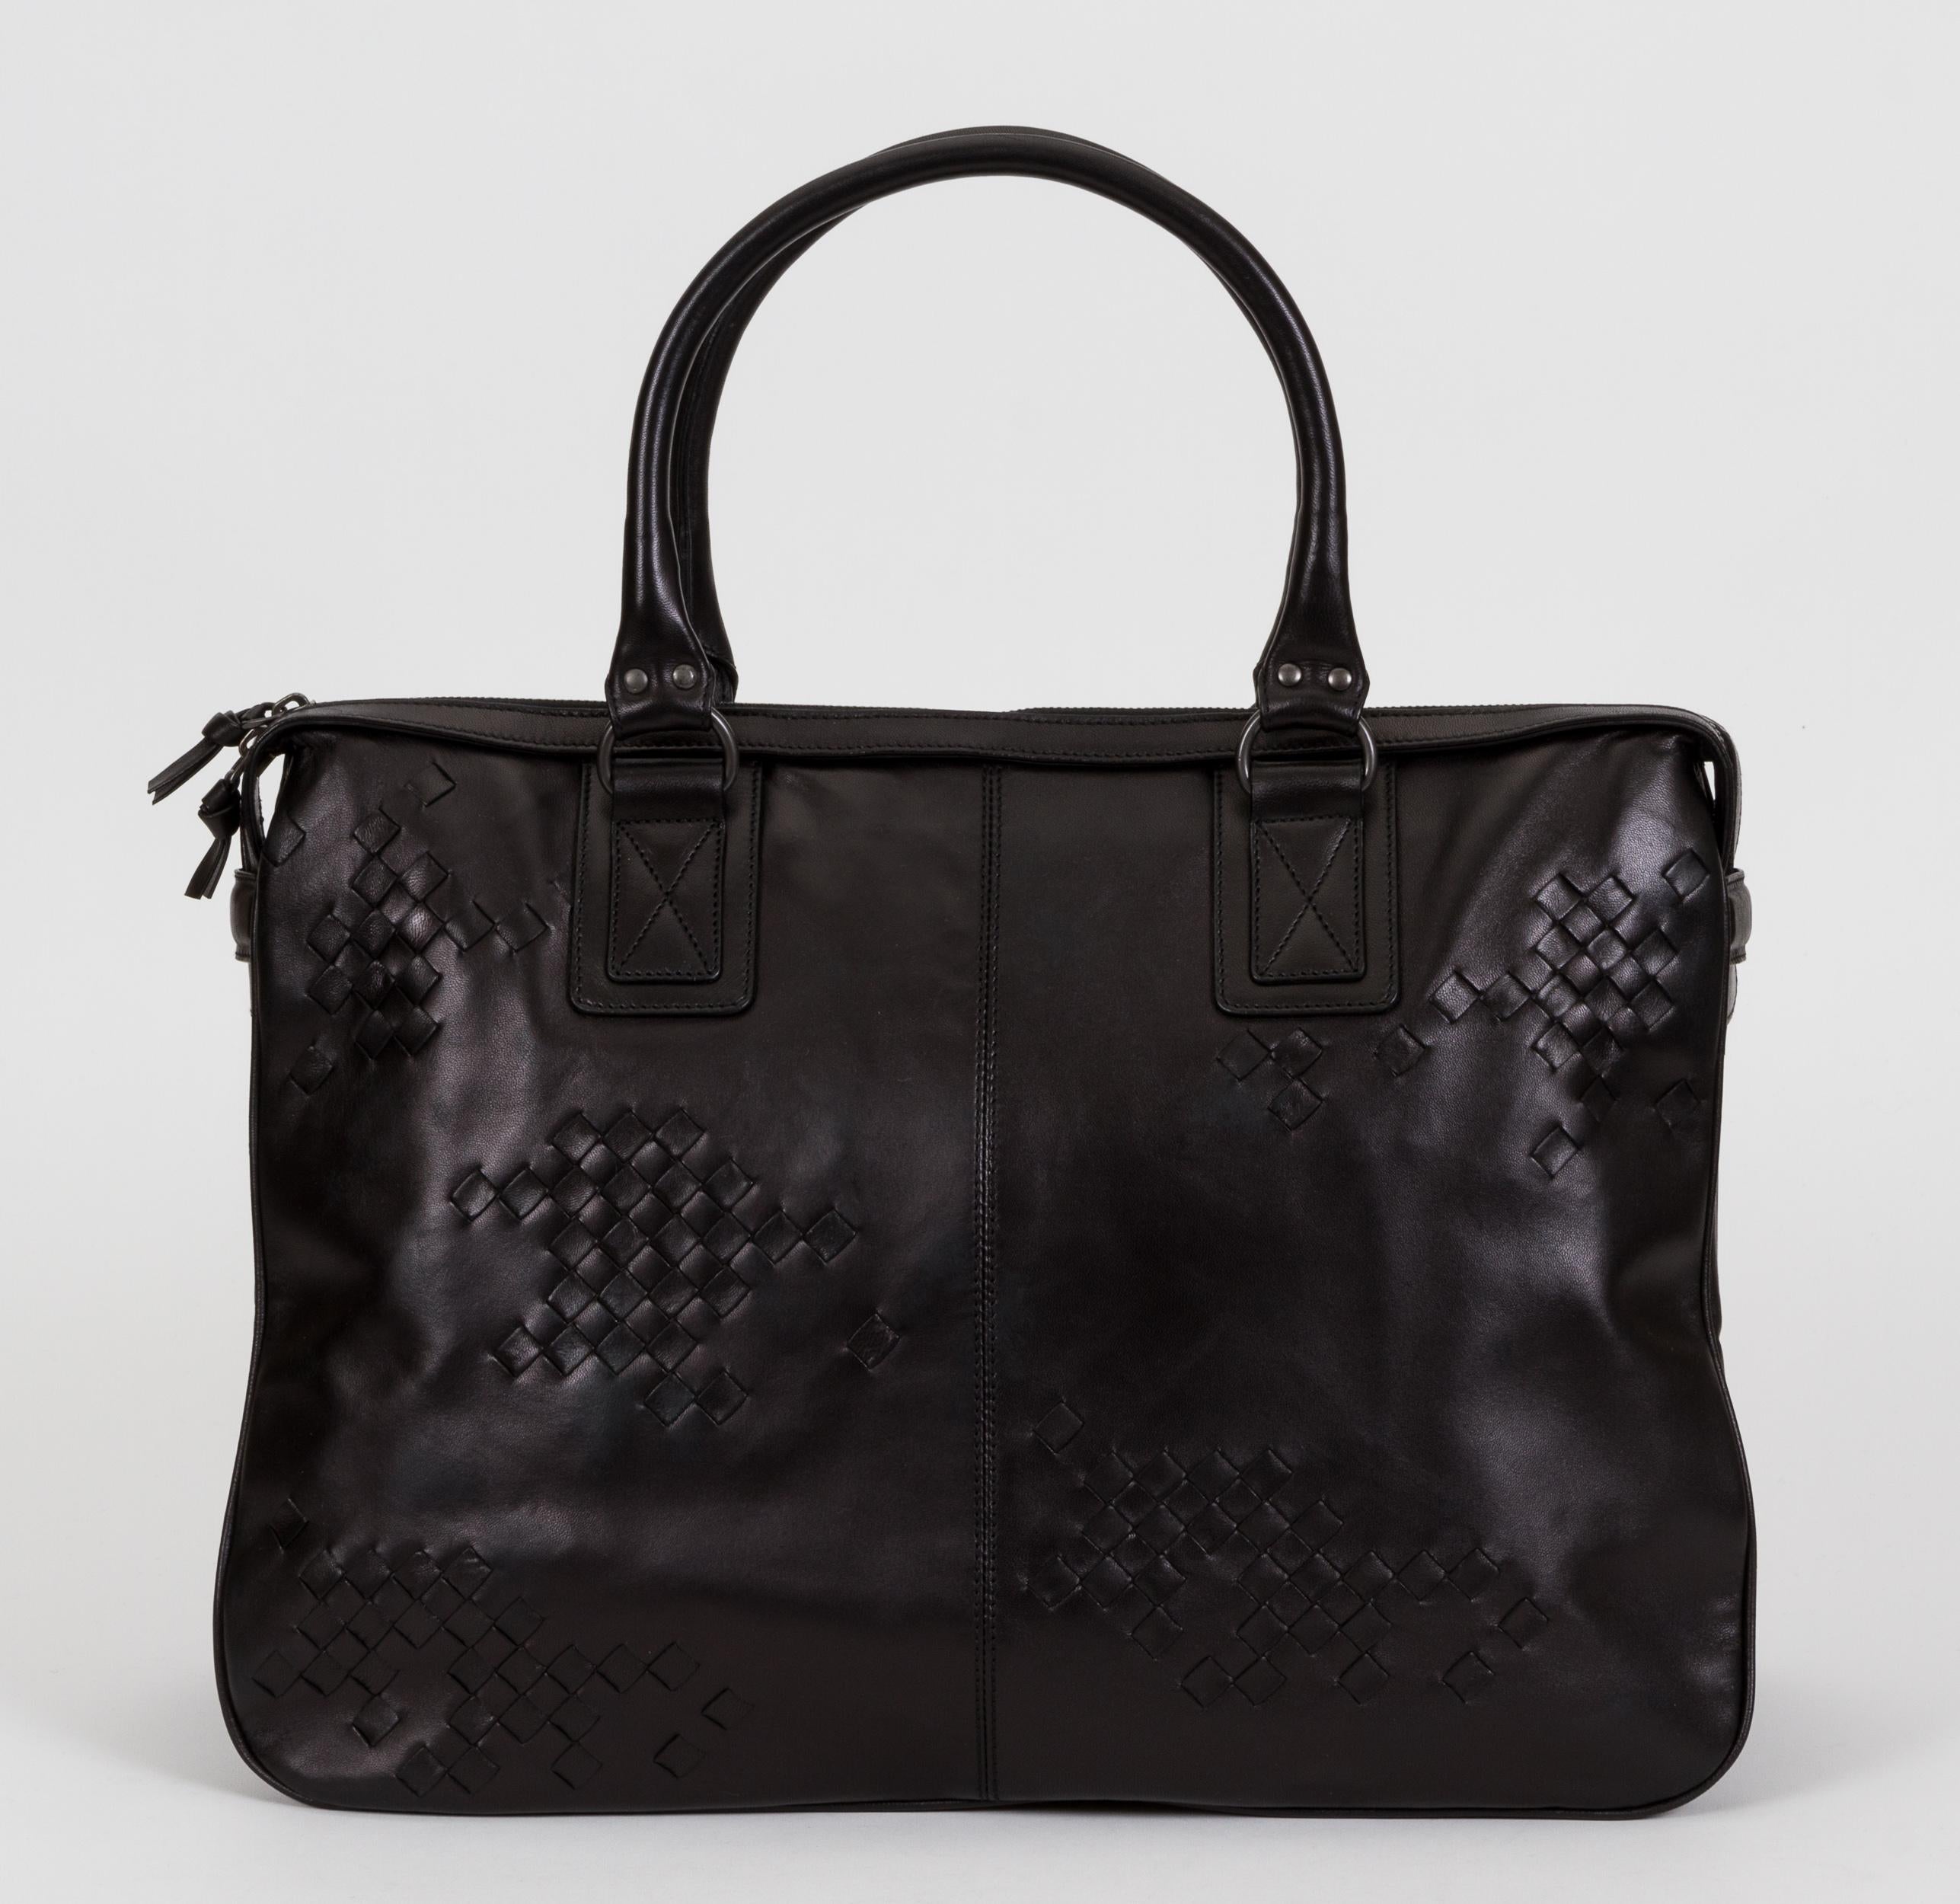 black leather handbag with compartments